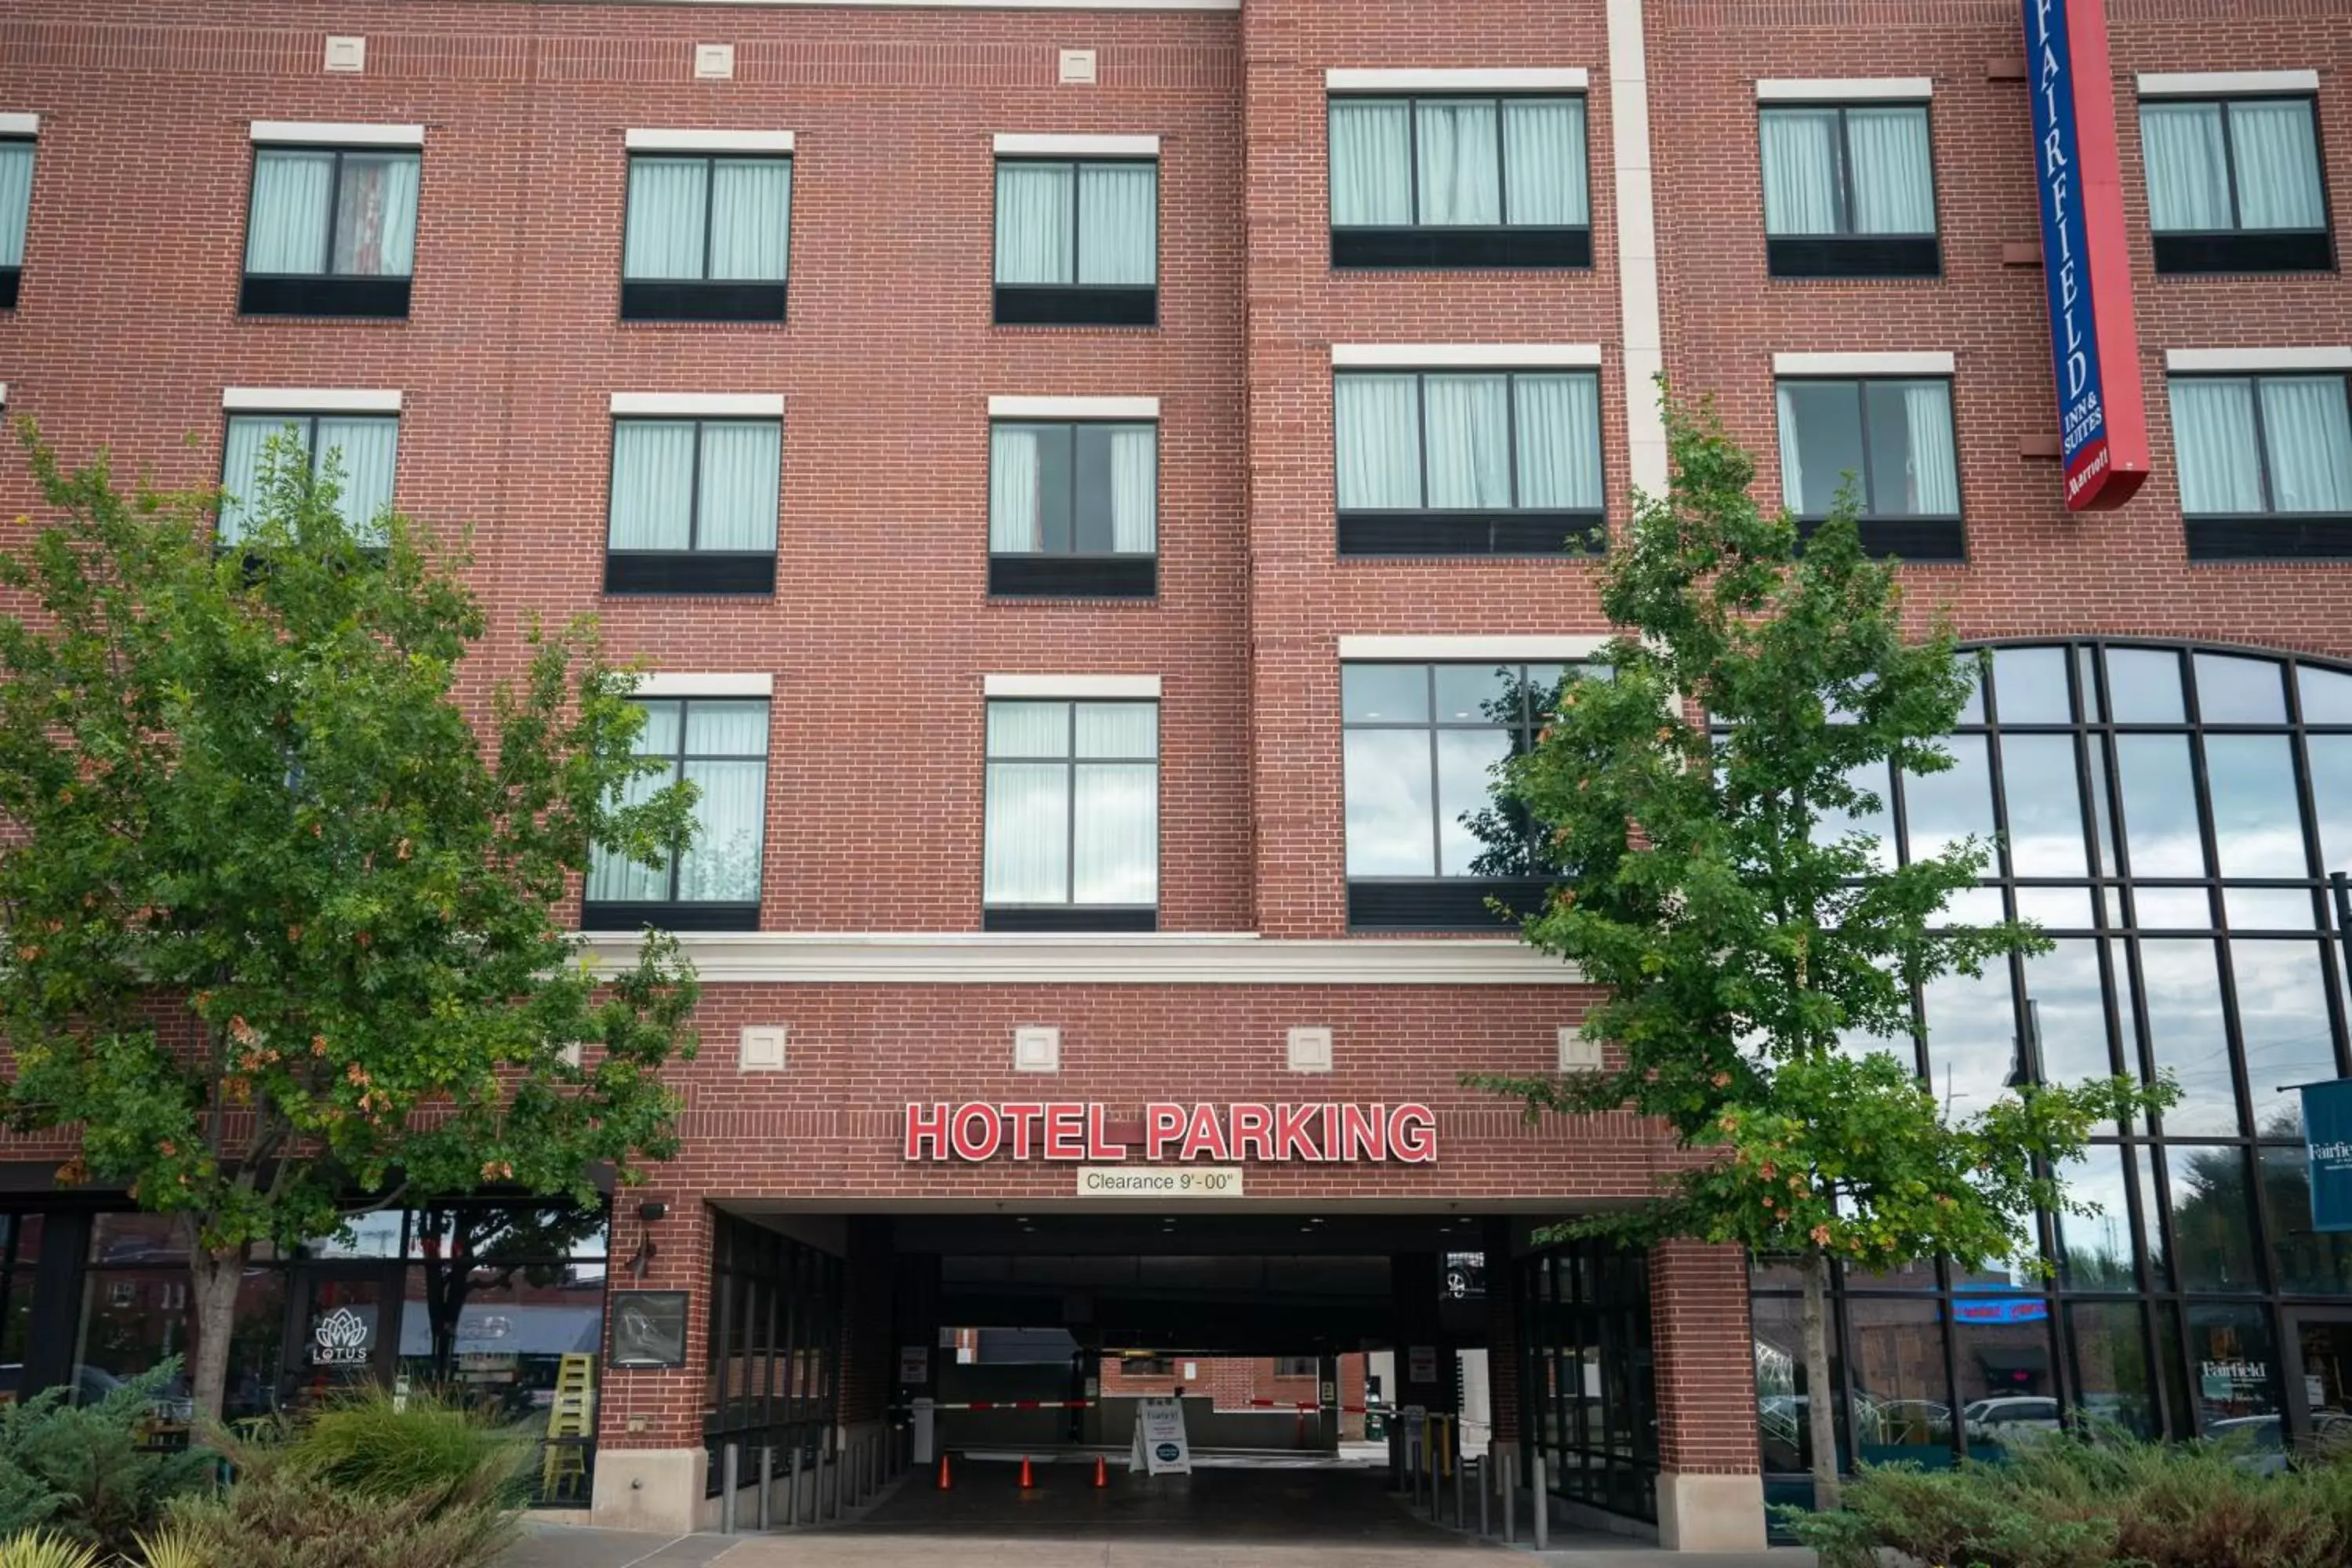 Parking, Property Building in Fairfield Inn & Suites Tulsa Downtown Arts District